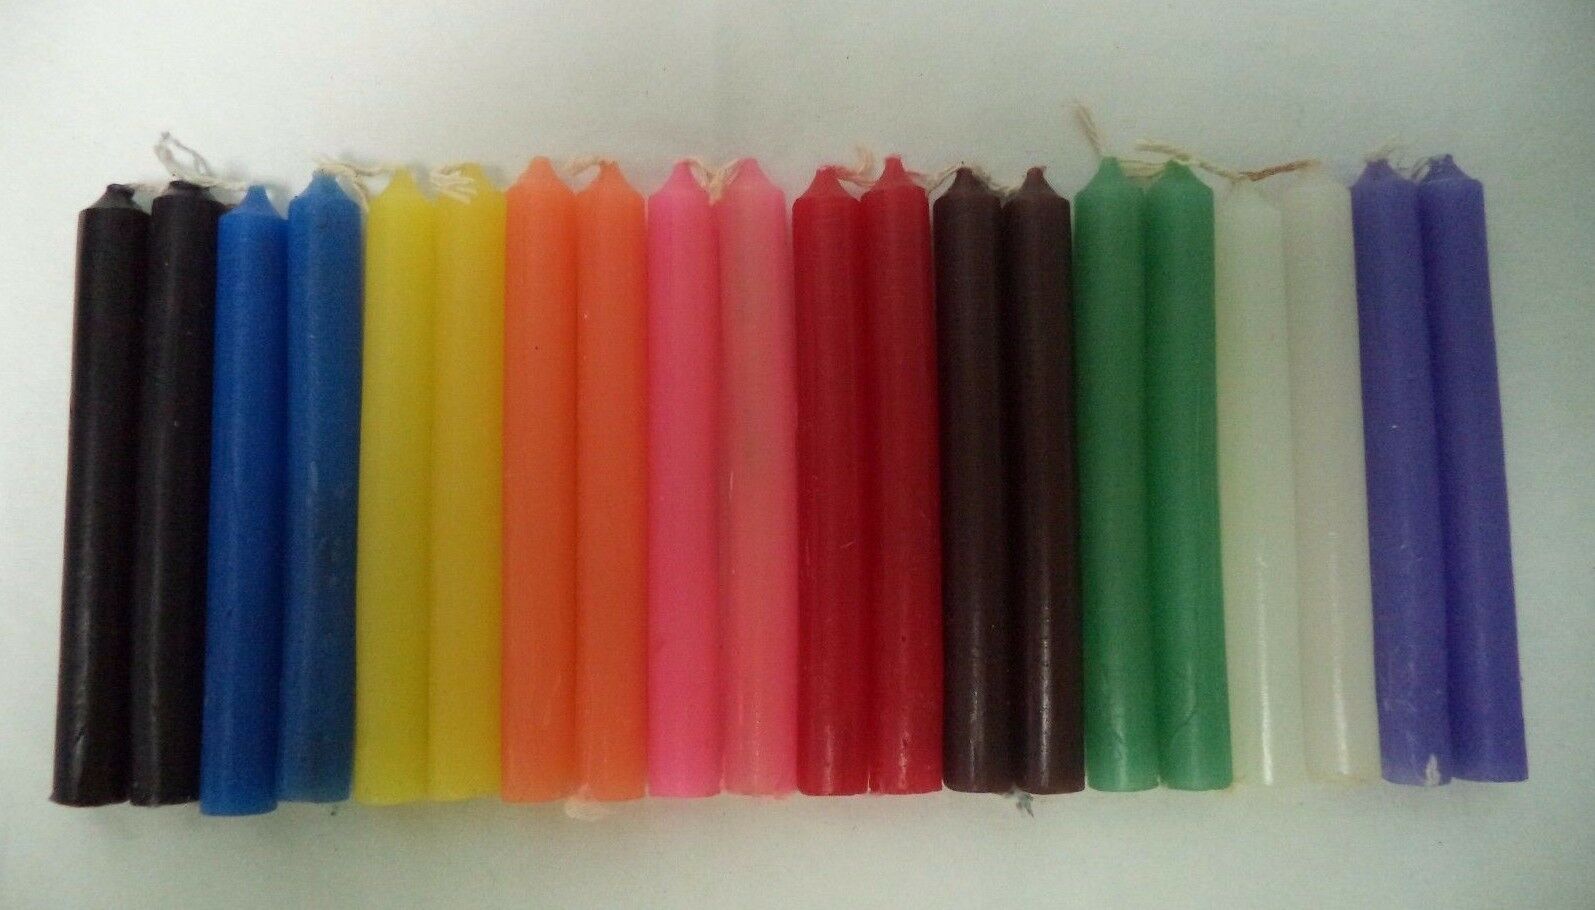 Set Of 20 Mixed Color / Assorted Spell / Chime Candles, 4" X 1/2" 10 Colors